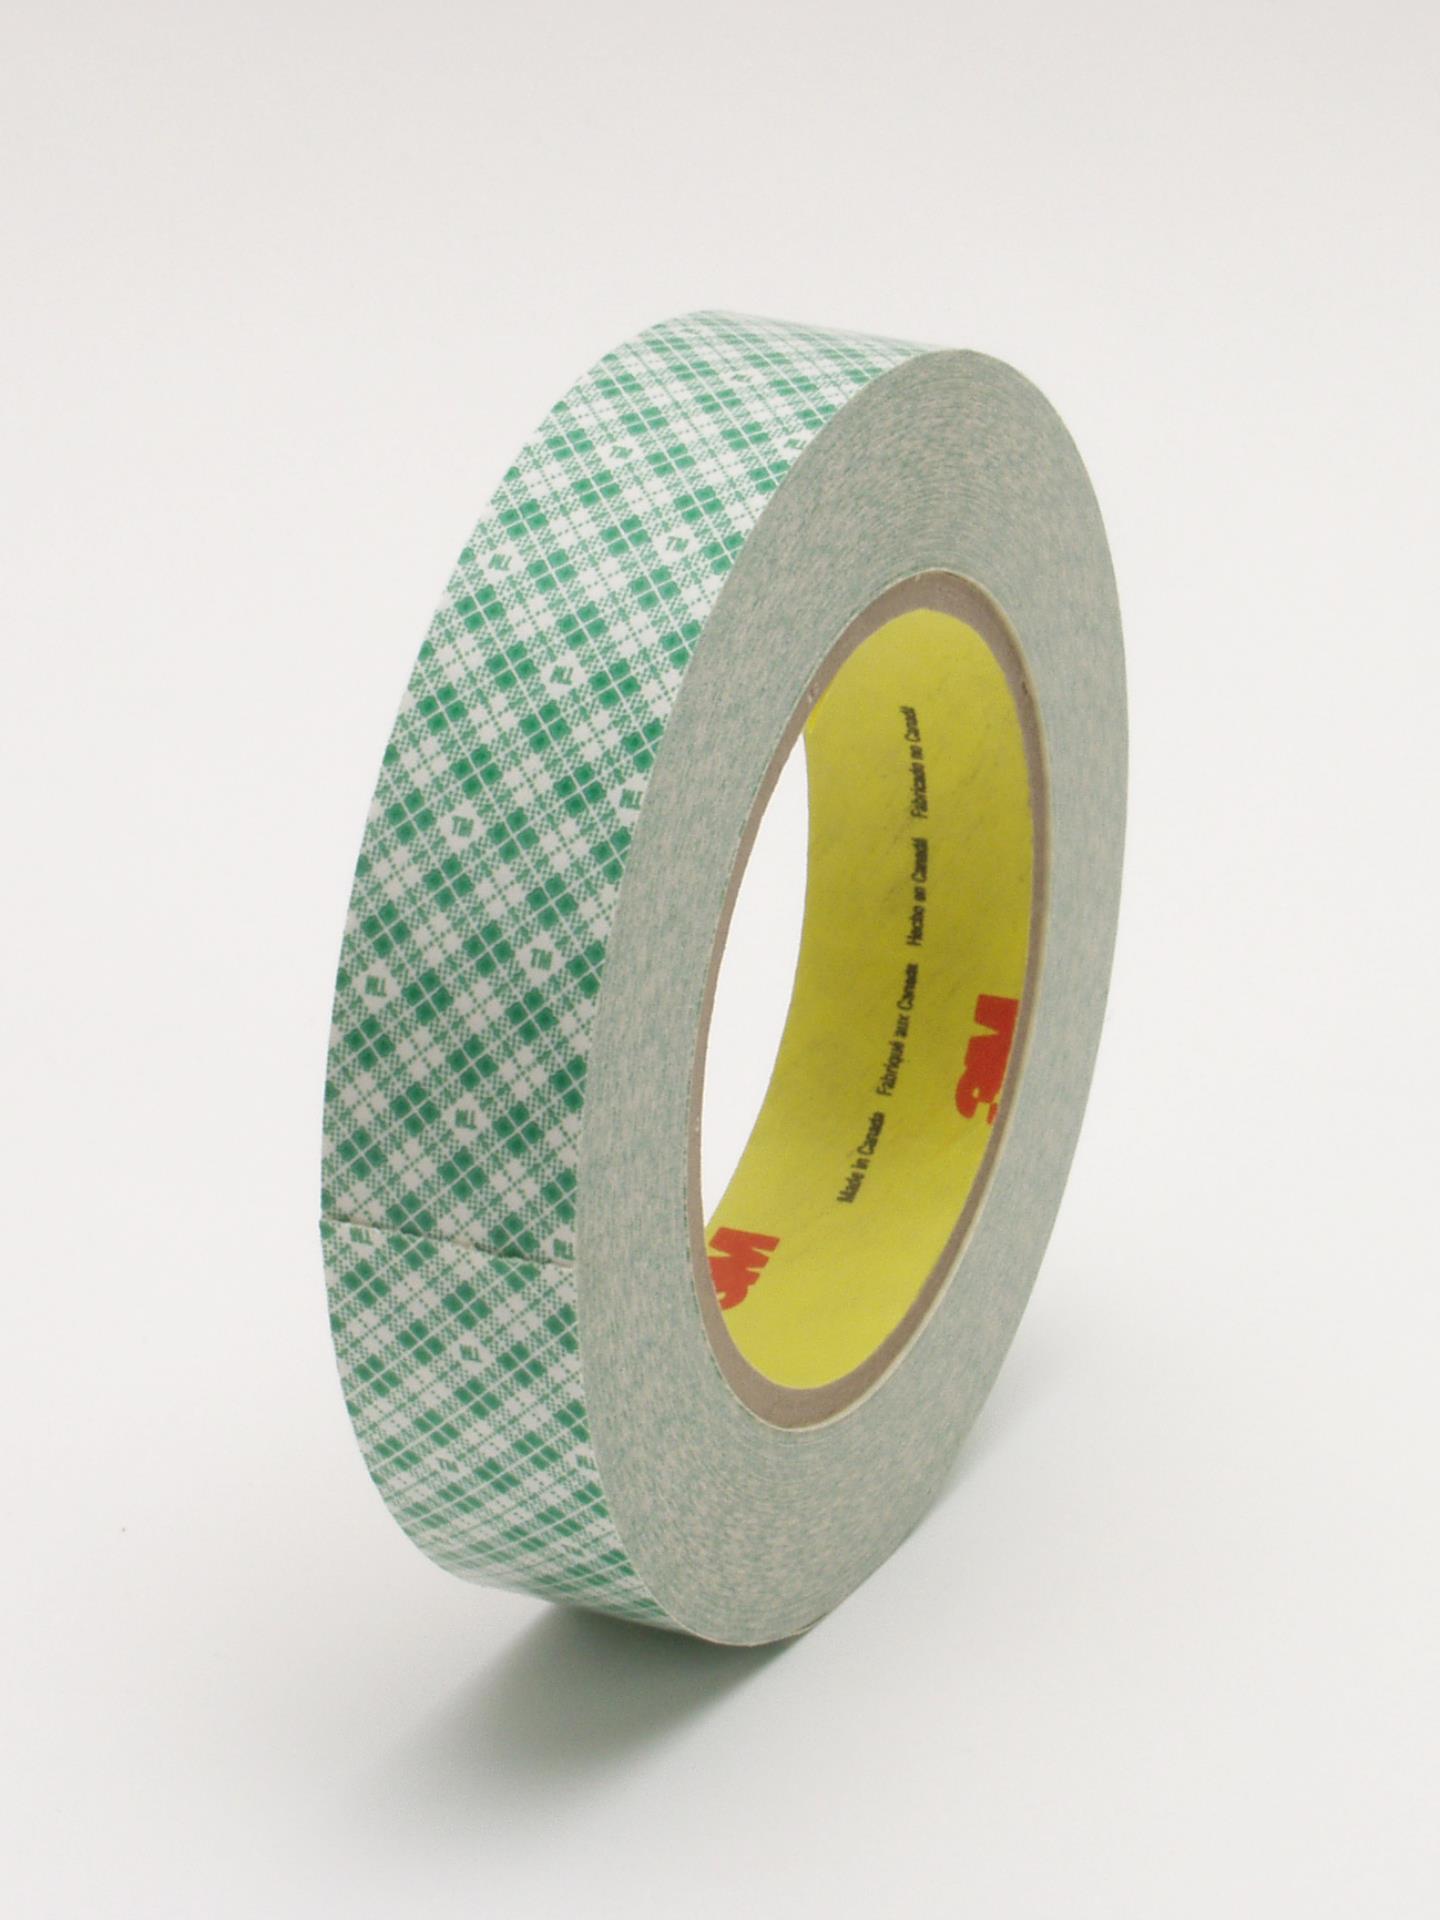 200 Volts Dielectric Strength Pack of 500 1.25 Width 1.25 Length 1.25 Width 3M 4026 CIRCLE-1.25-500 3M 4026 CIRCLE-1.25-500 Natural Polyurethane Double Coated Foam Tape 1.25 Length Pack of 500 